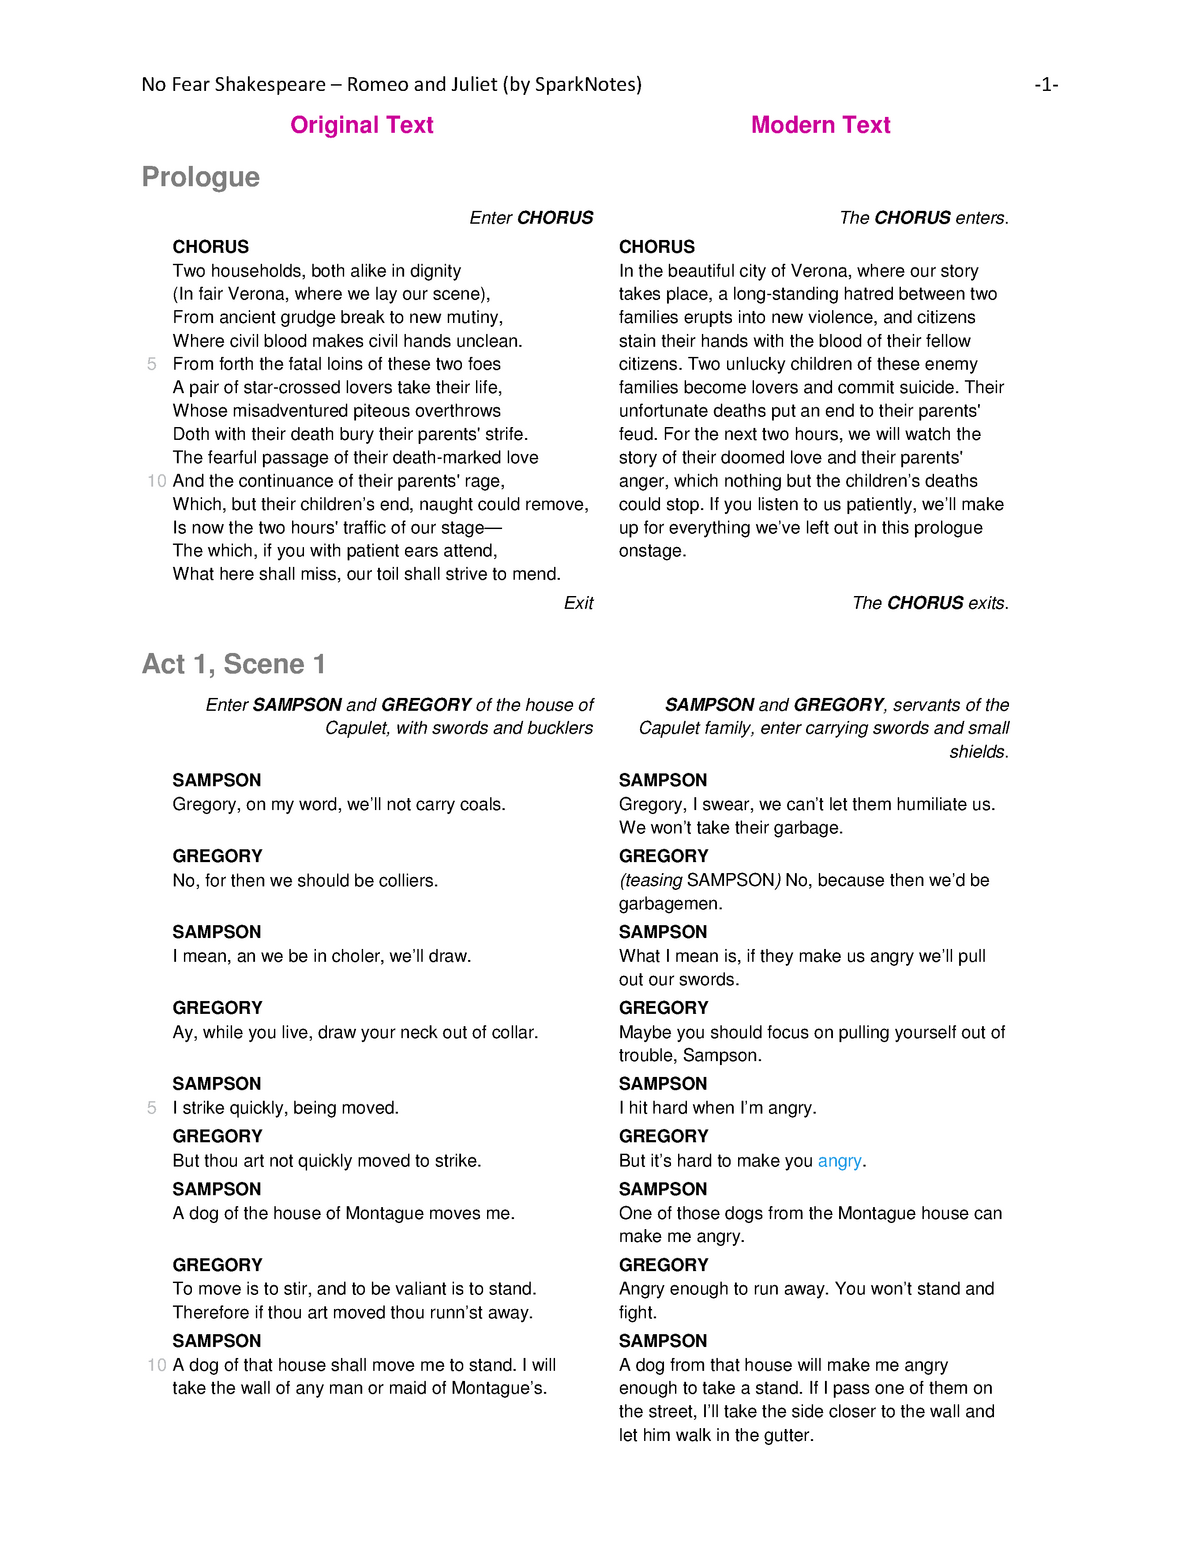 shakespear play romeo and juliet script